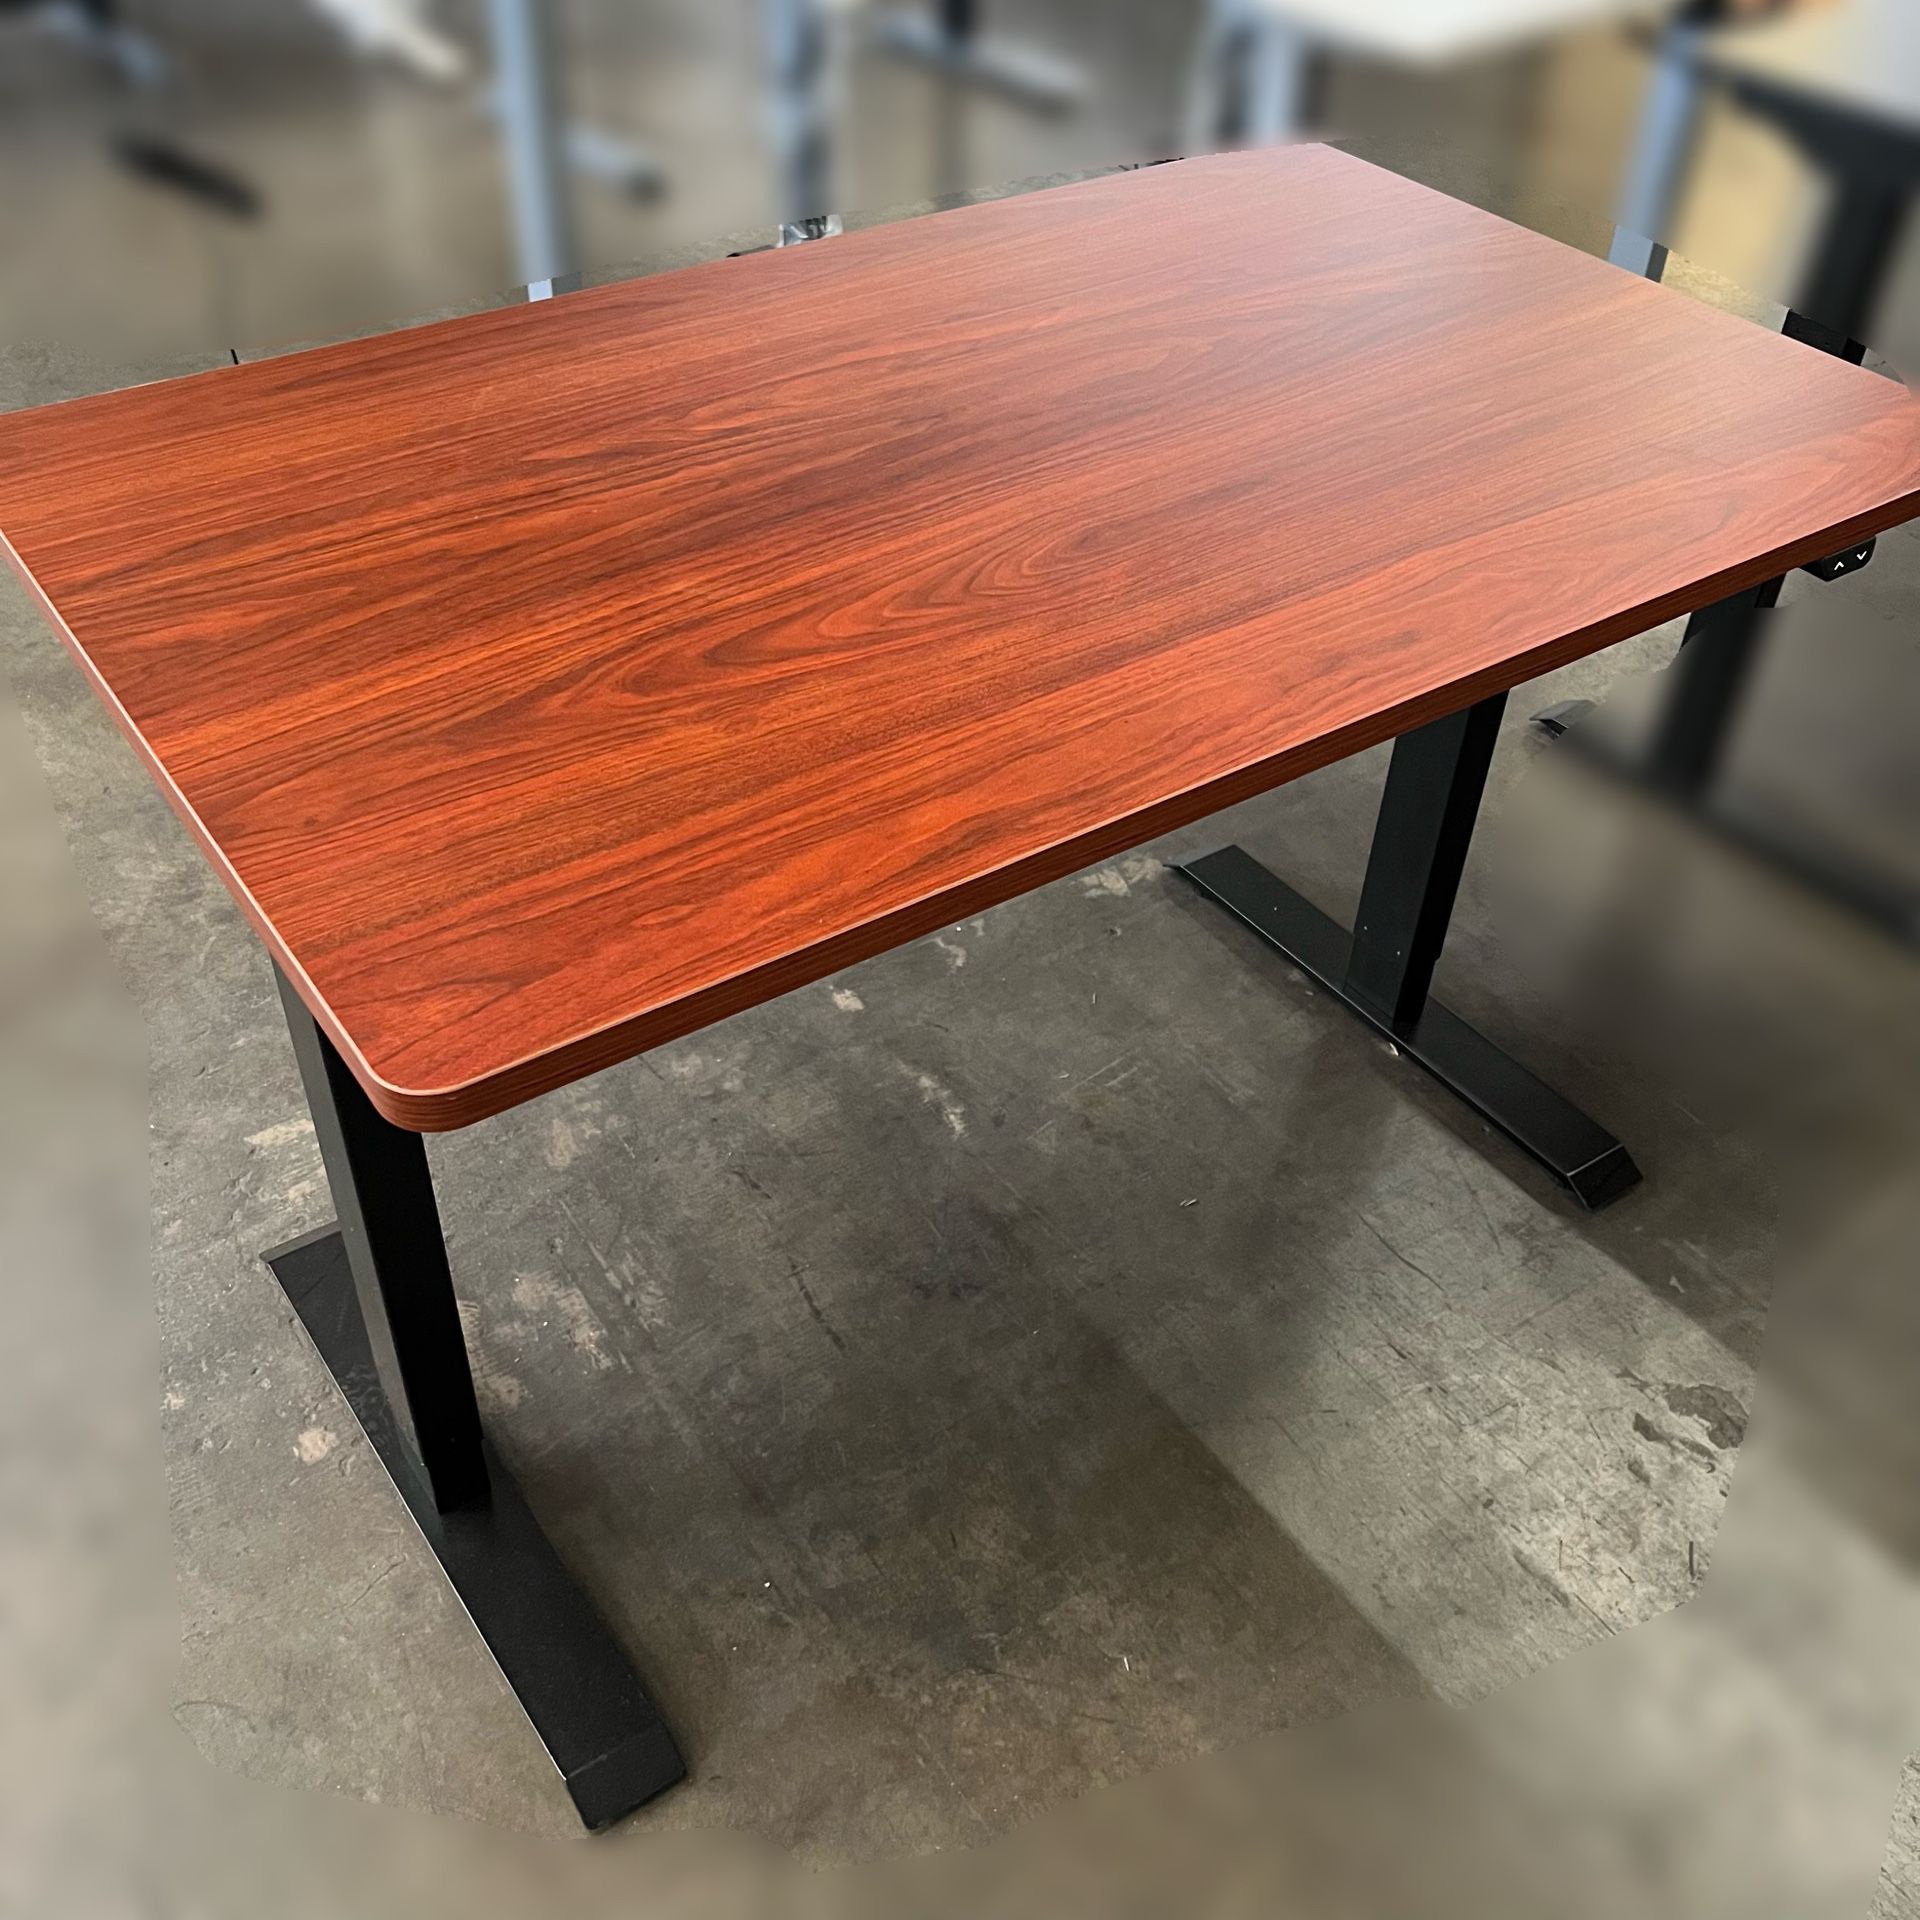 48” Mahogany/Red Wood Electric Standing Desk, Height Adjustable Computer Desk, Sit and Stand Office Desk ($150 to $170)